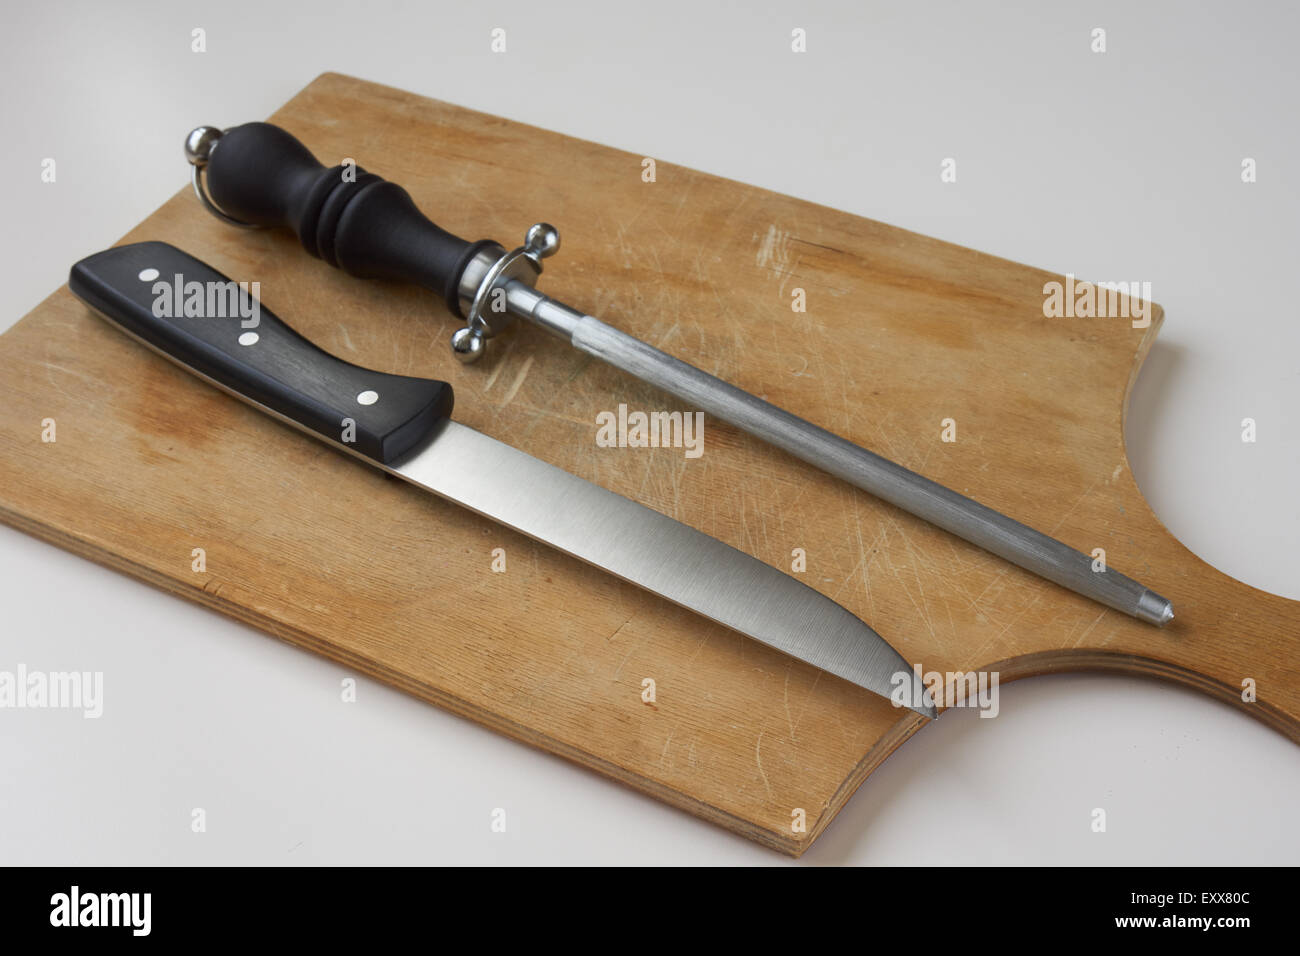 Knife with knife sharpener on wooden cutting board Stock Photo